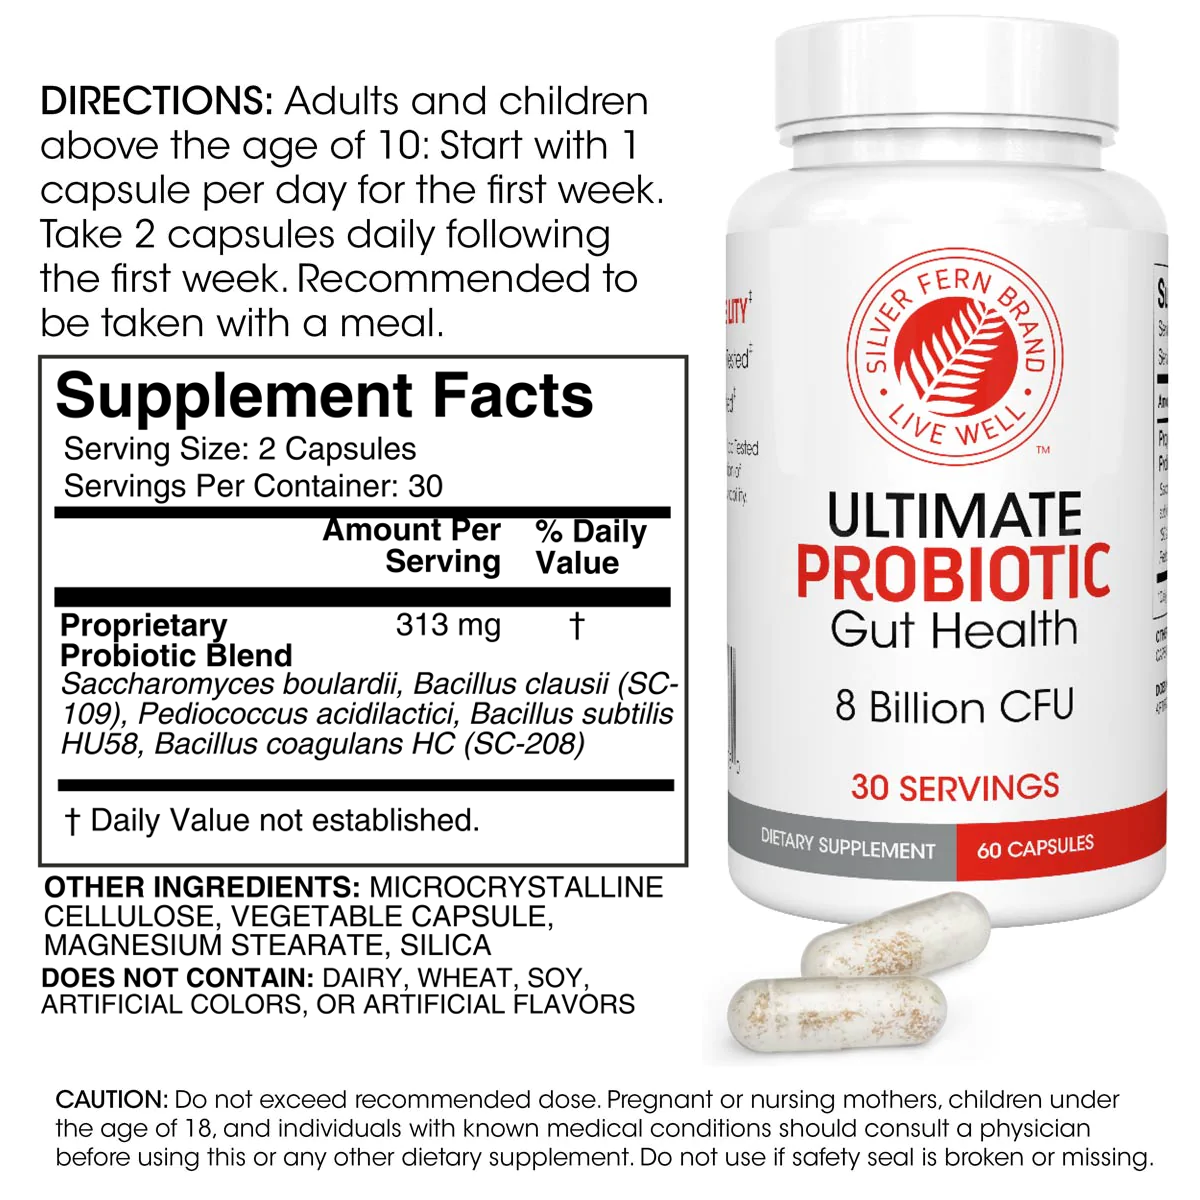 Ultimate Probiotic Supplement Facts